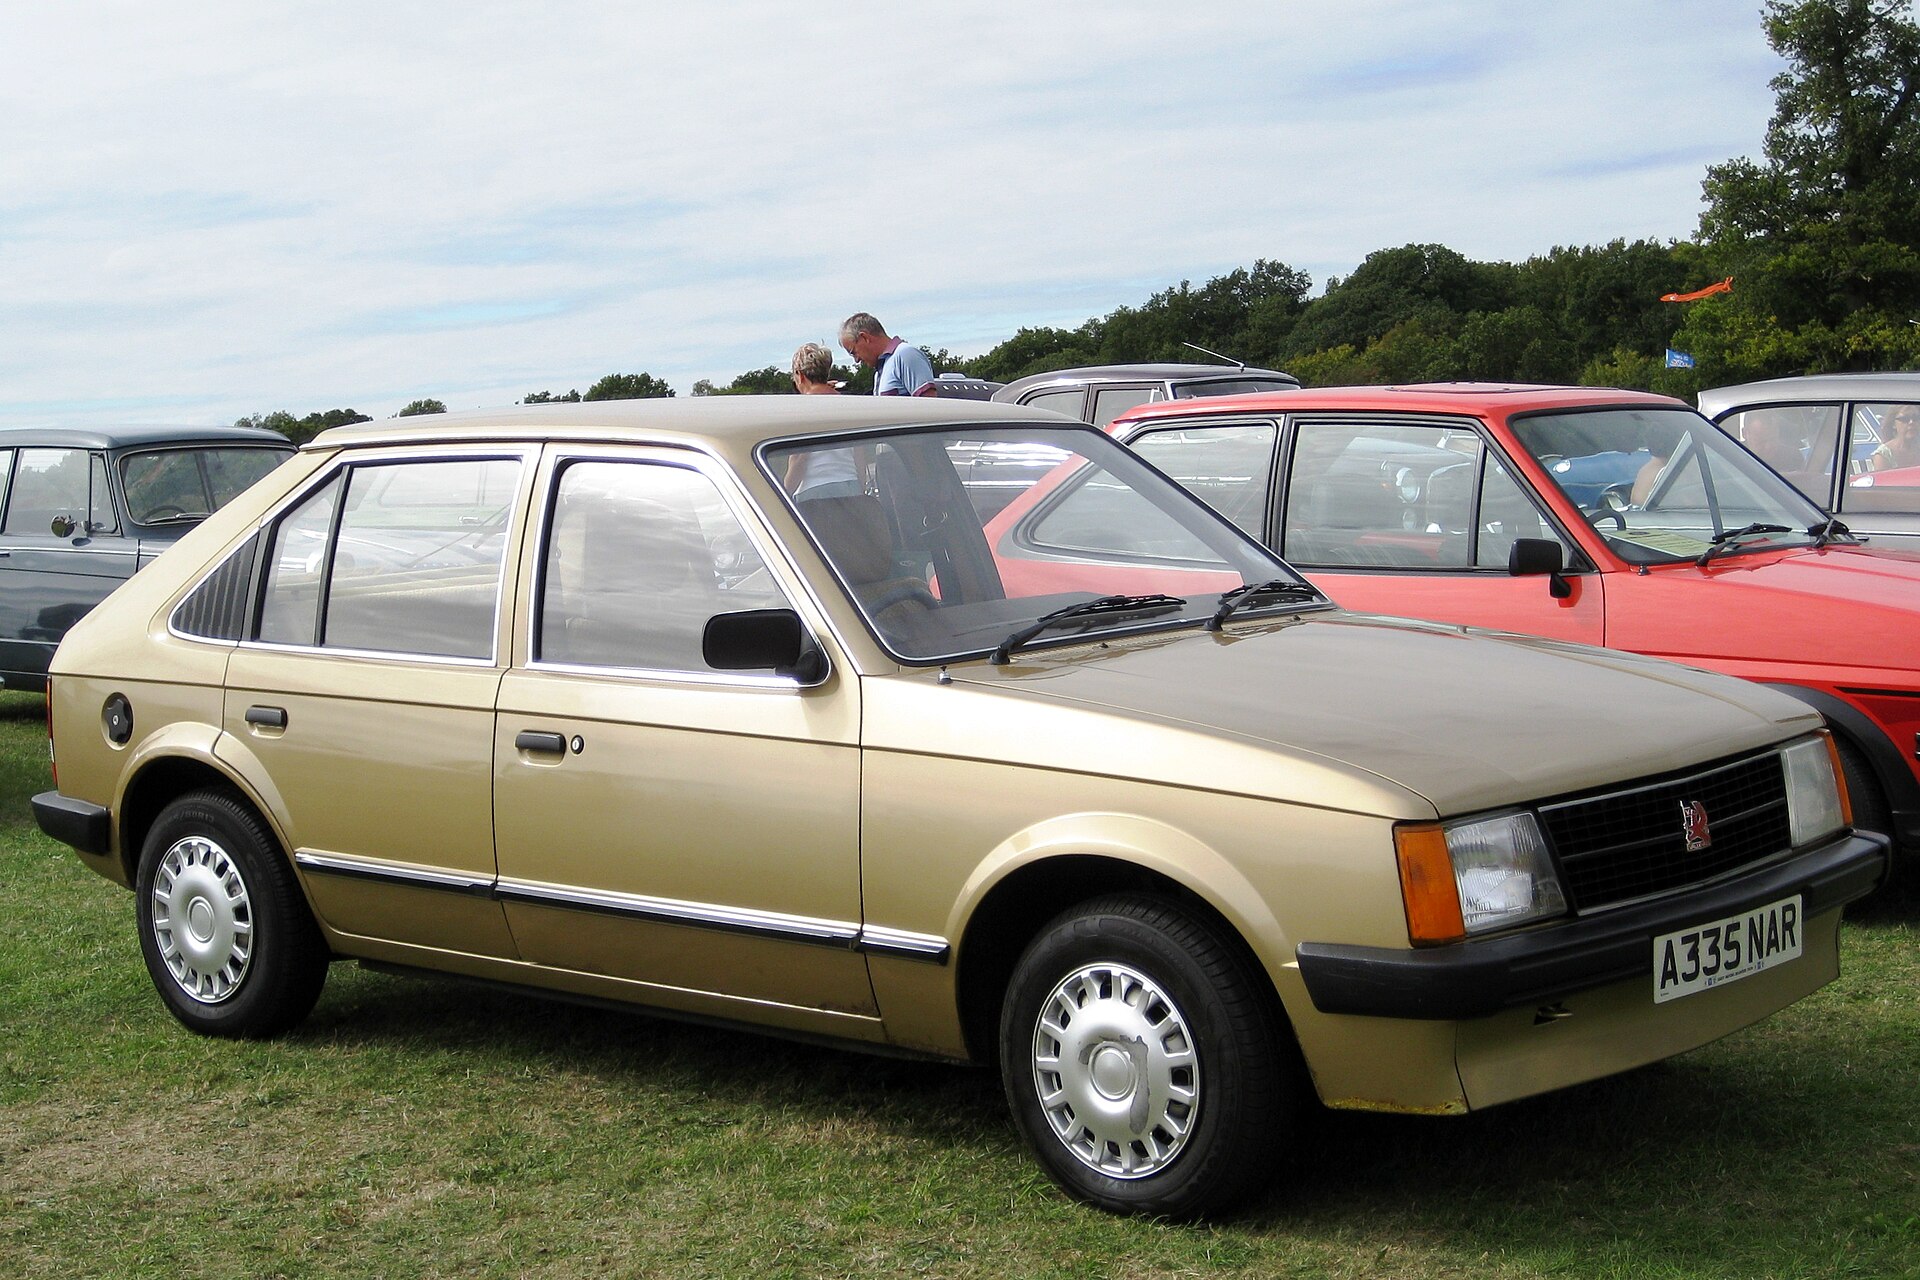 1920px-Vauxhall_Astra_1598cc_first_registered_October_1983.JPG